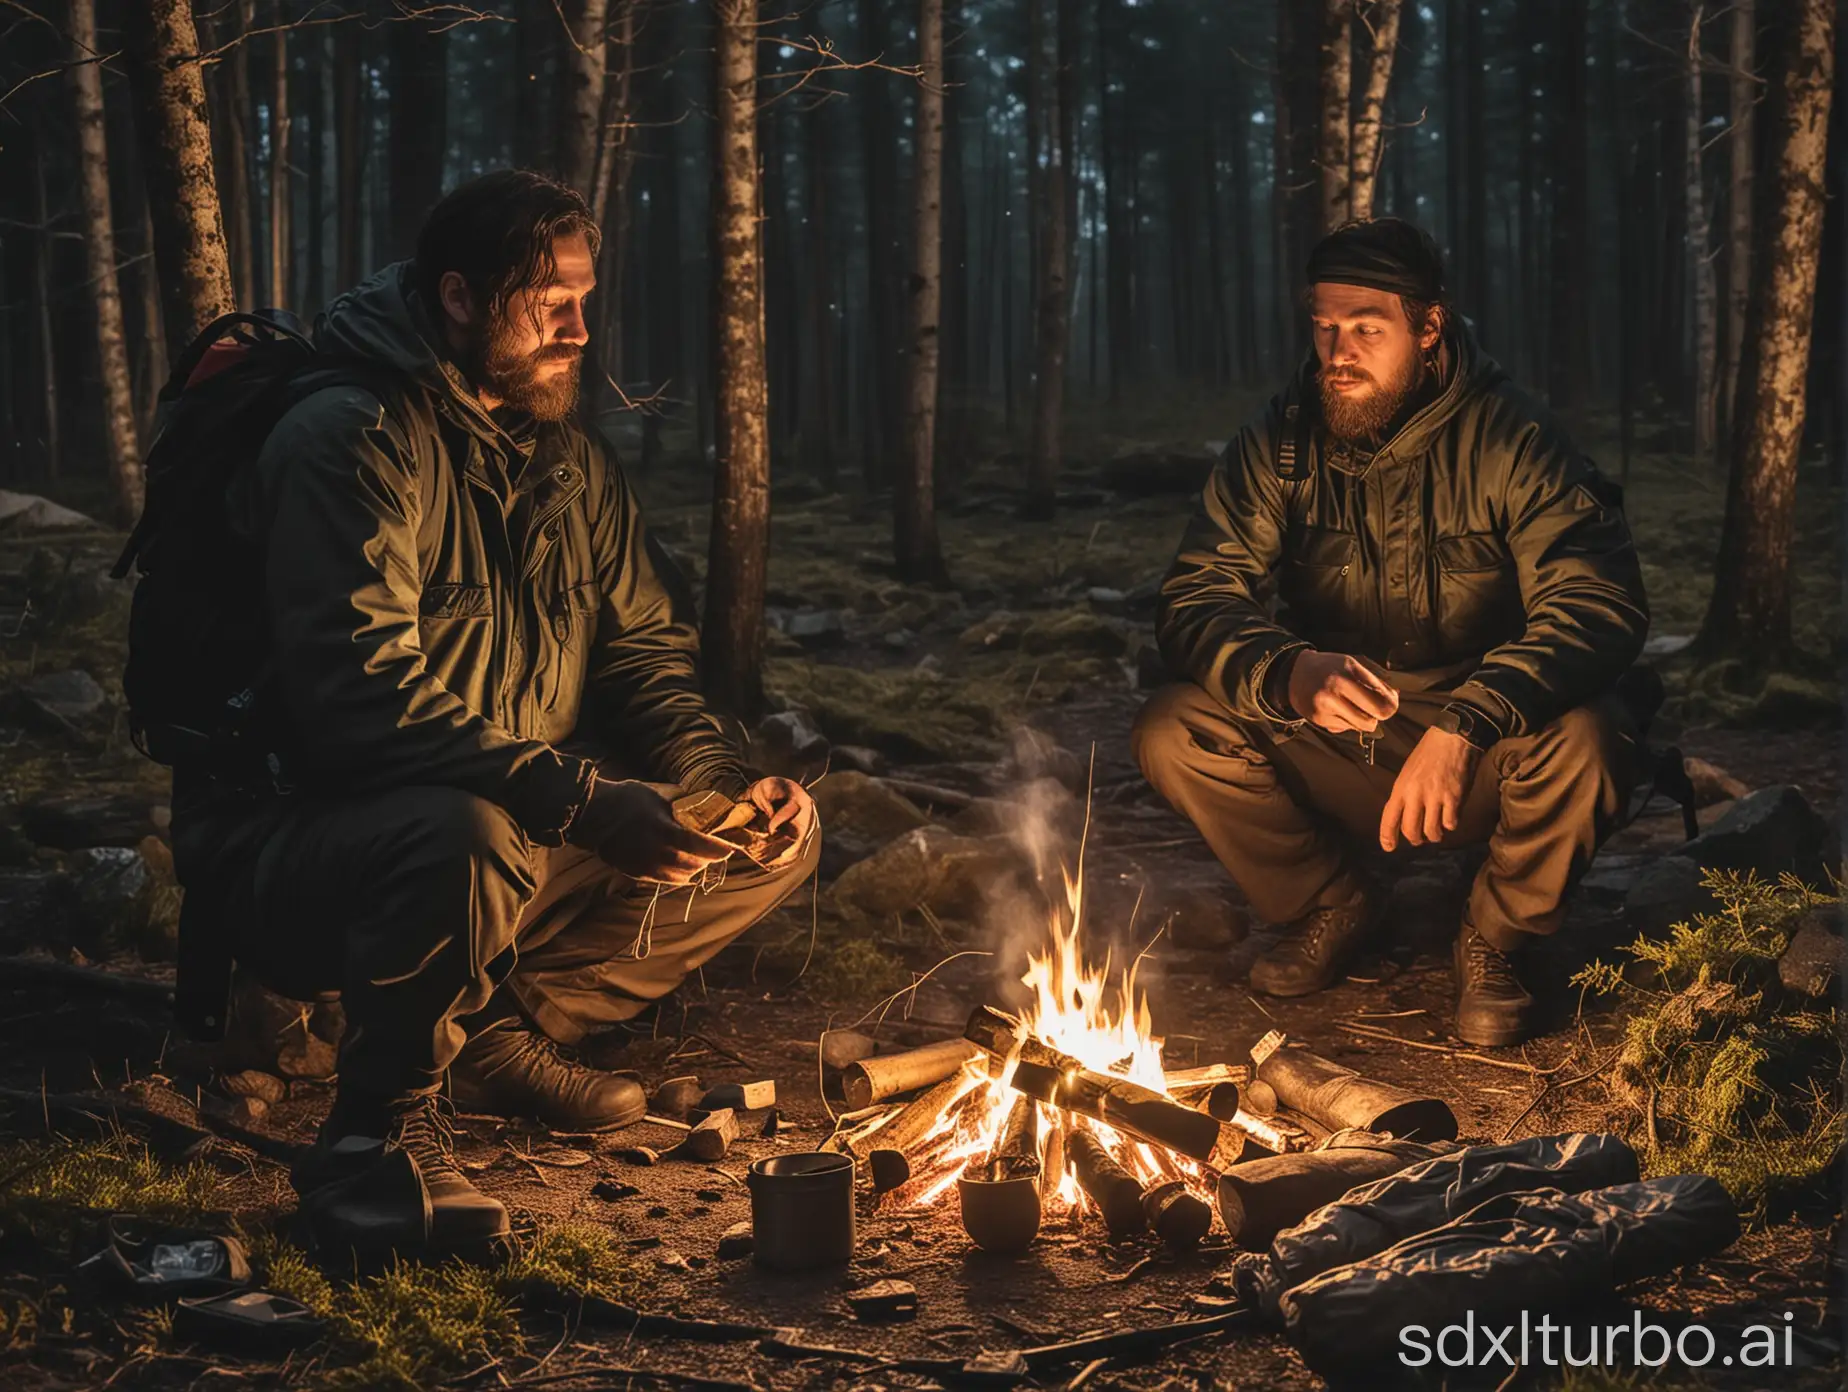 2 Man in forest night  fire camping with survival prepper on the gorund with all stuff but Gold and silver bars too,night